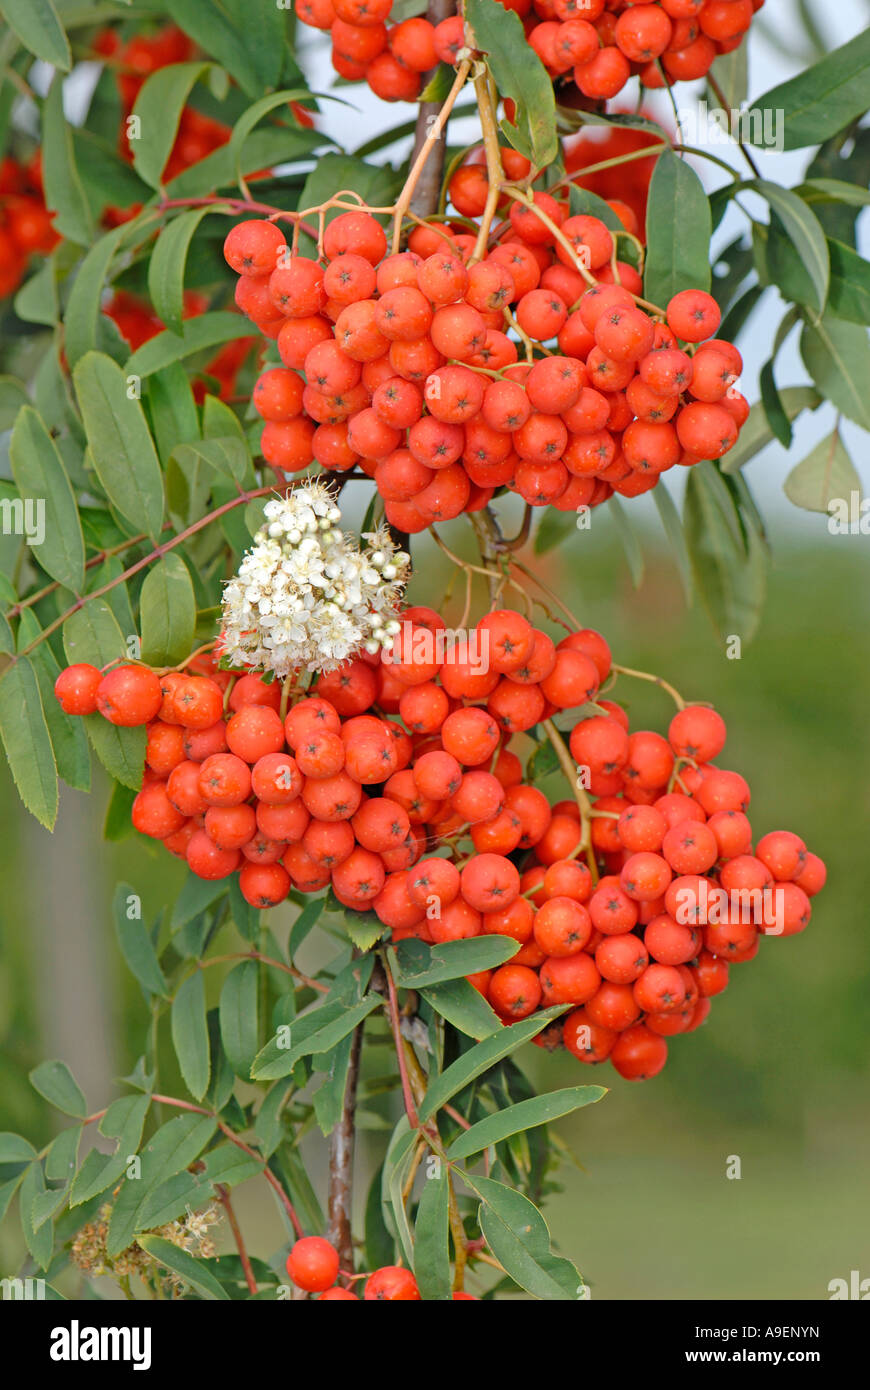 European Mountain Ash, Rowan (Sorbus aucuparia var. moravica), variety: Konzentra, twig with leaves, flowers and ripe berries Stock Photo